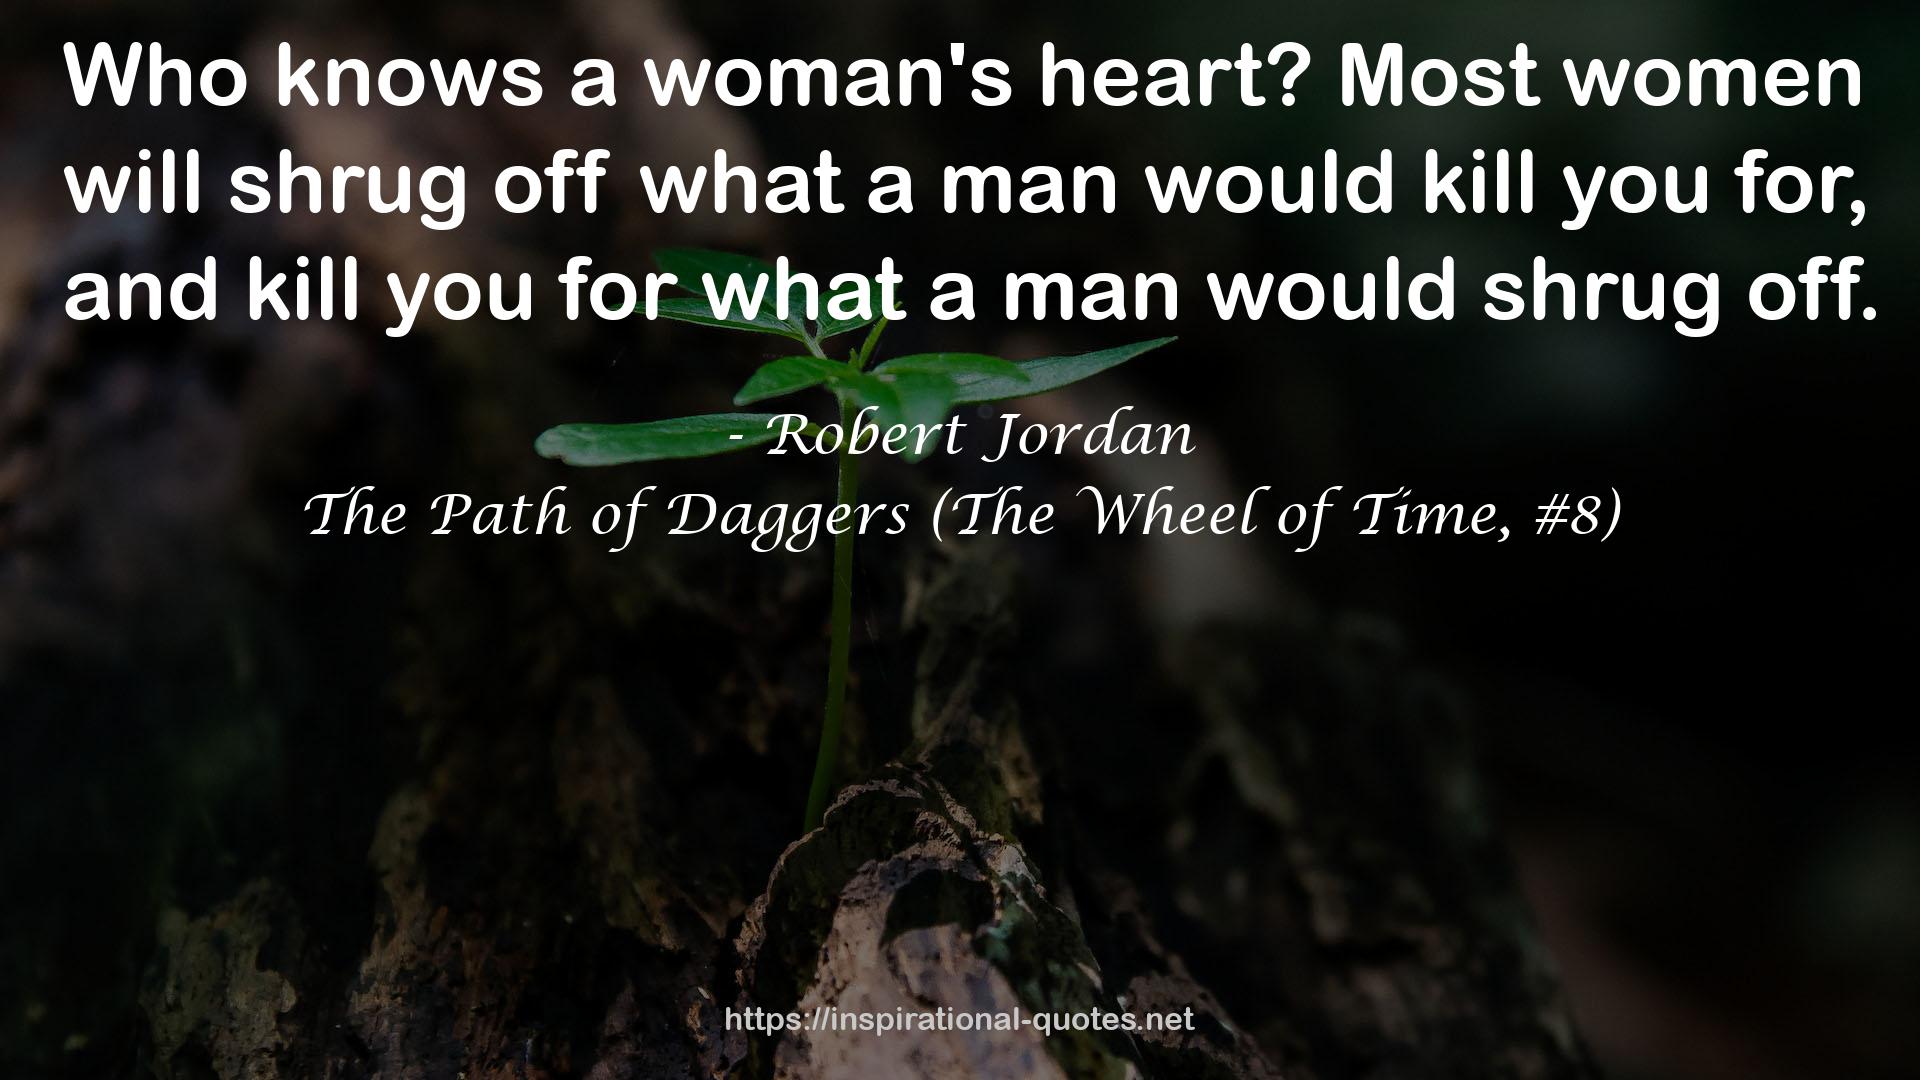 The Path of Daggers (The Wheel of Time, #8) QUOTES